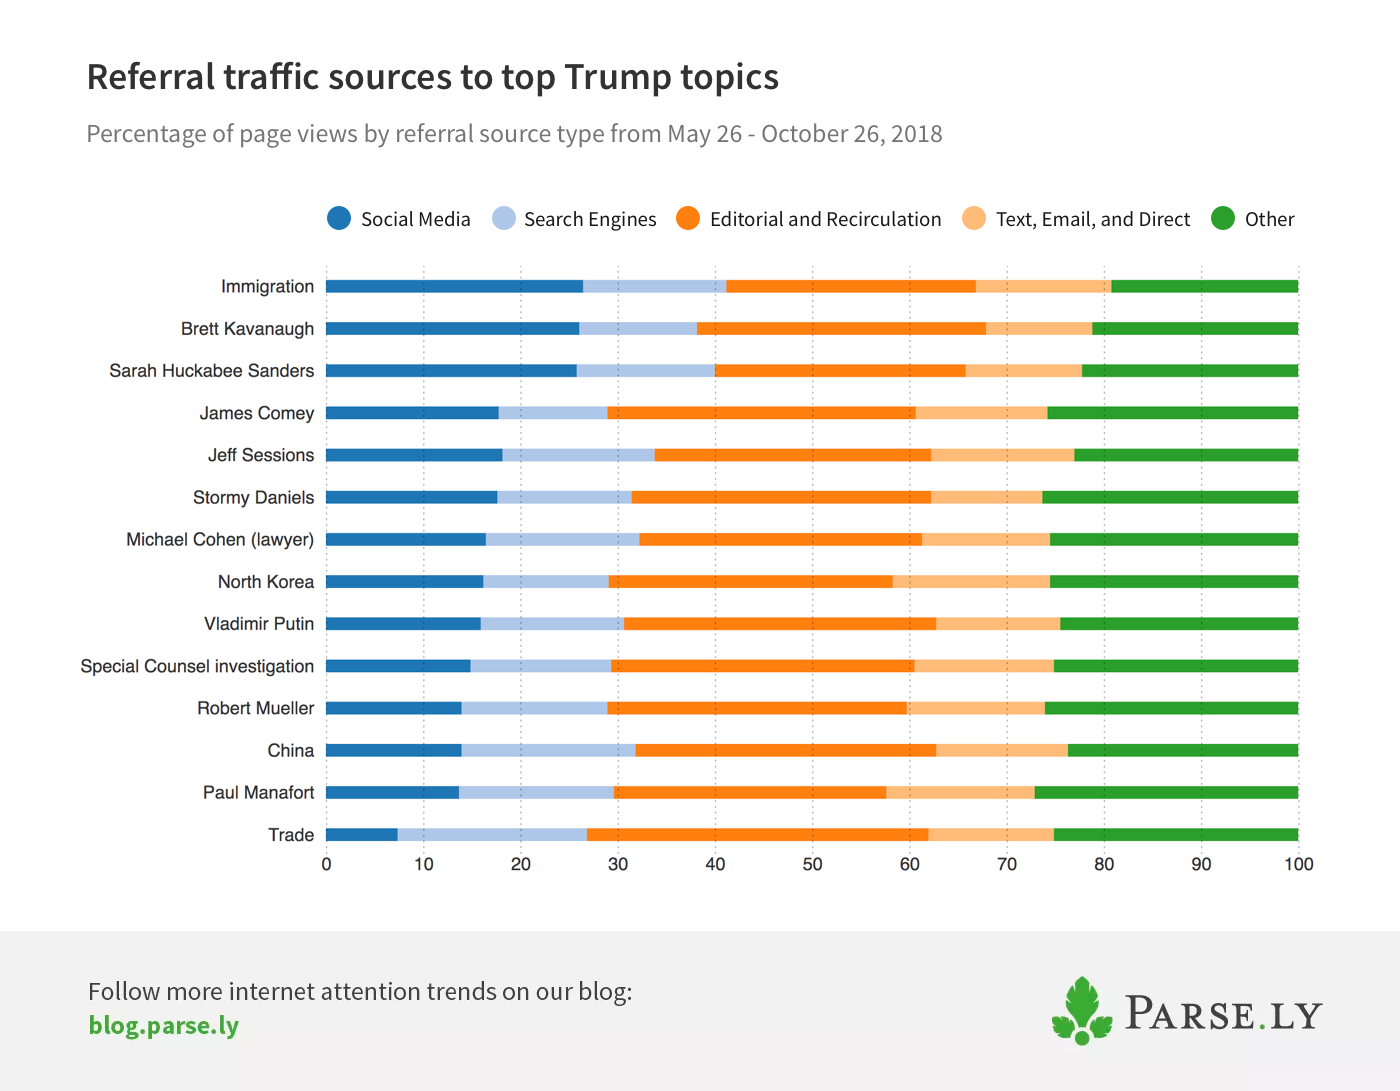 Referral sources to Trump topics